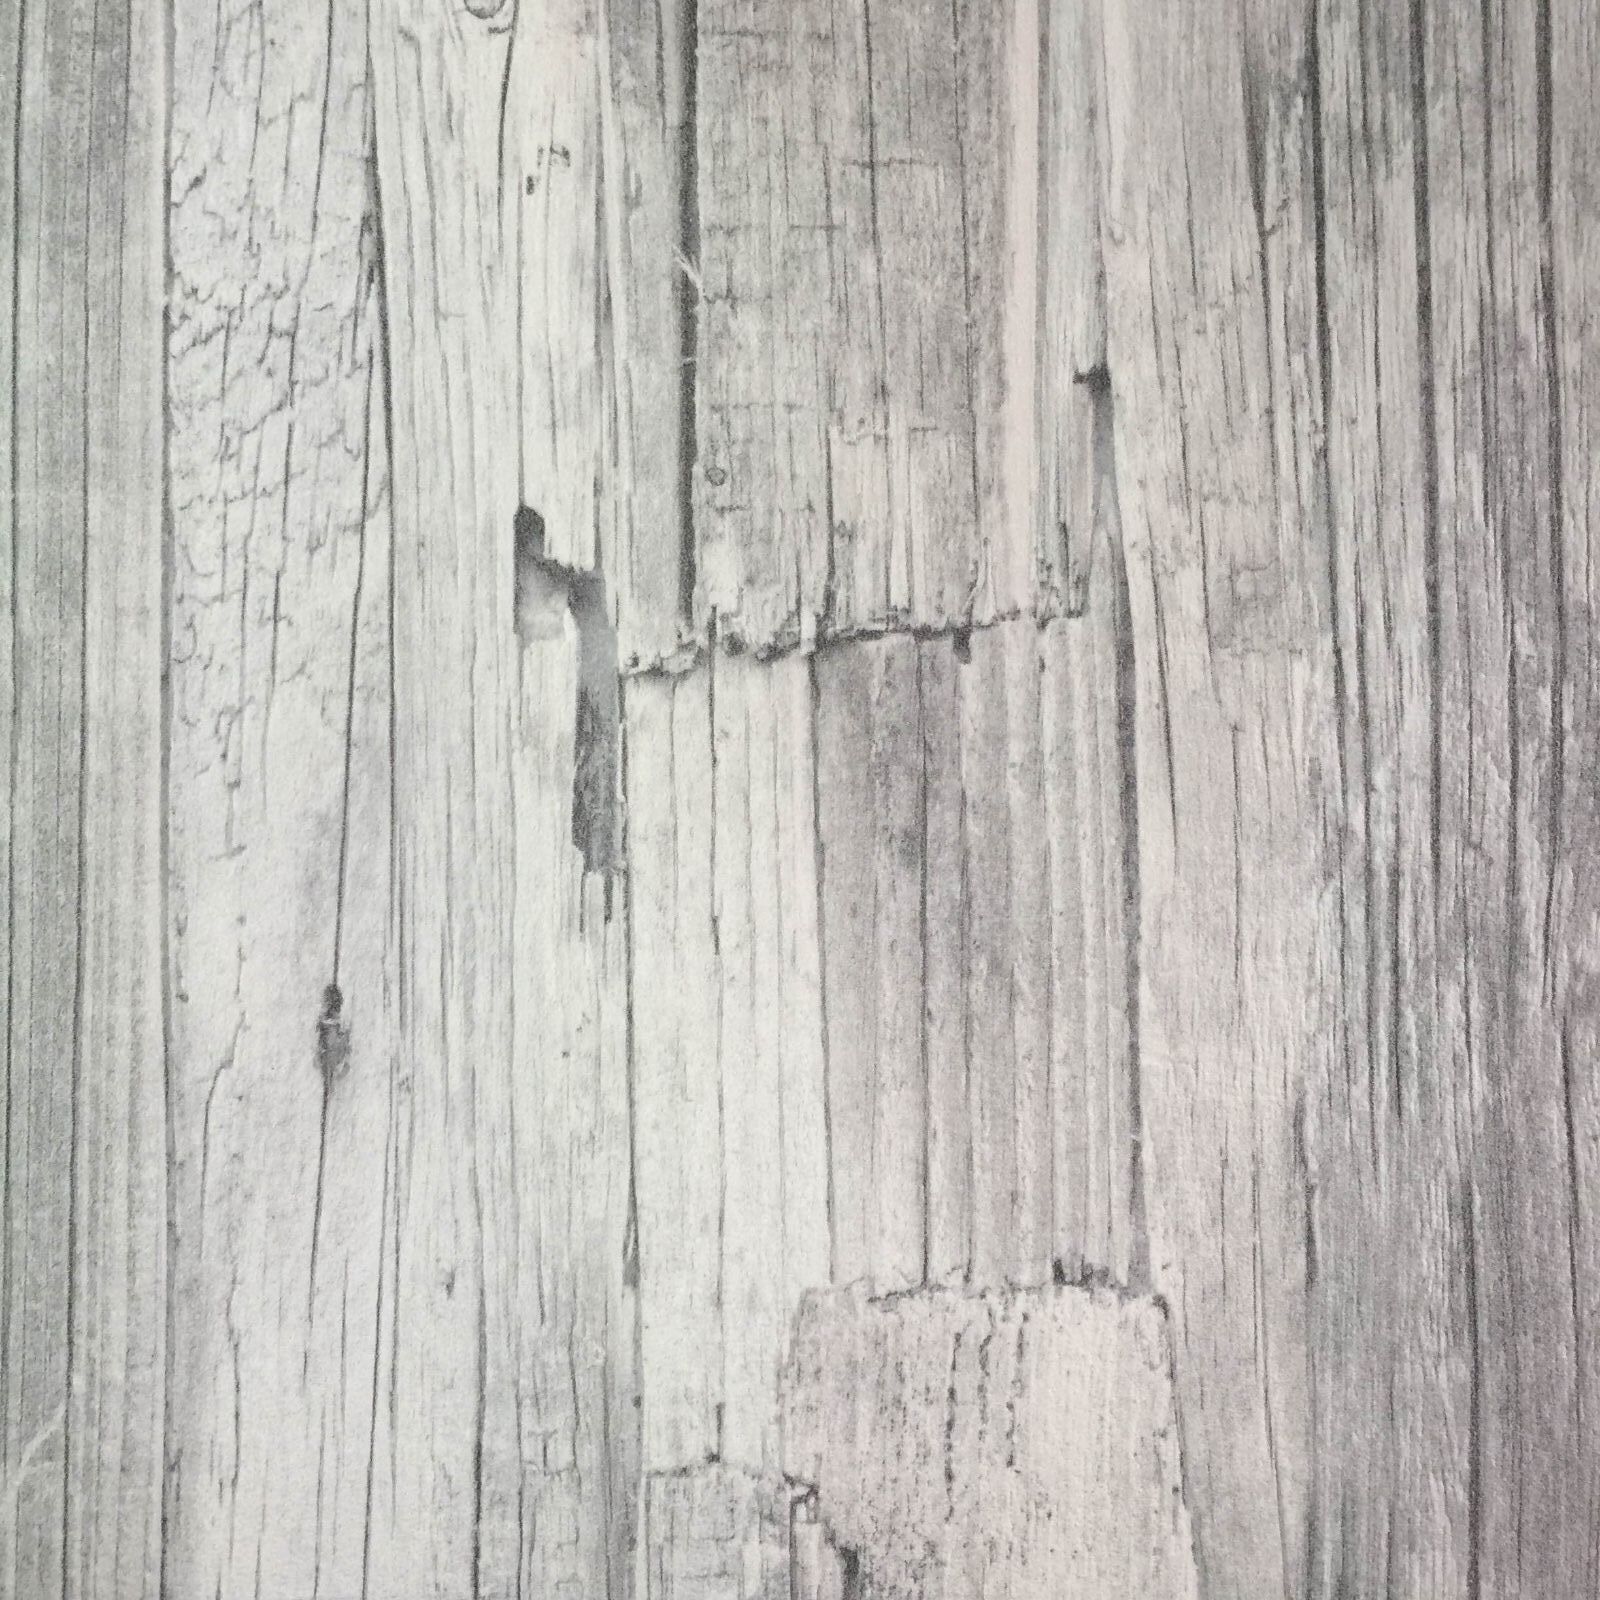 French Provincial Rustic Timber Wood Effect Wallpaper in Greyscale